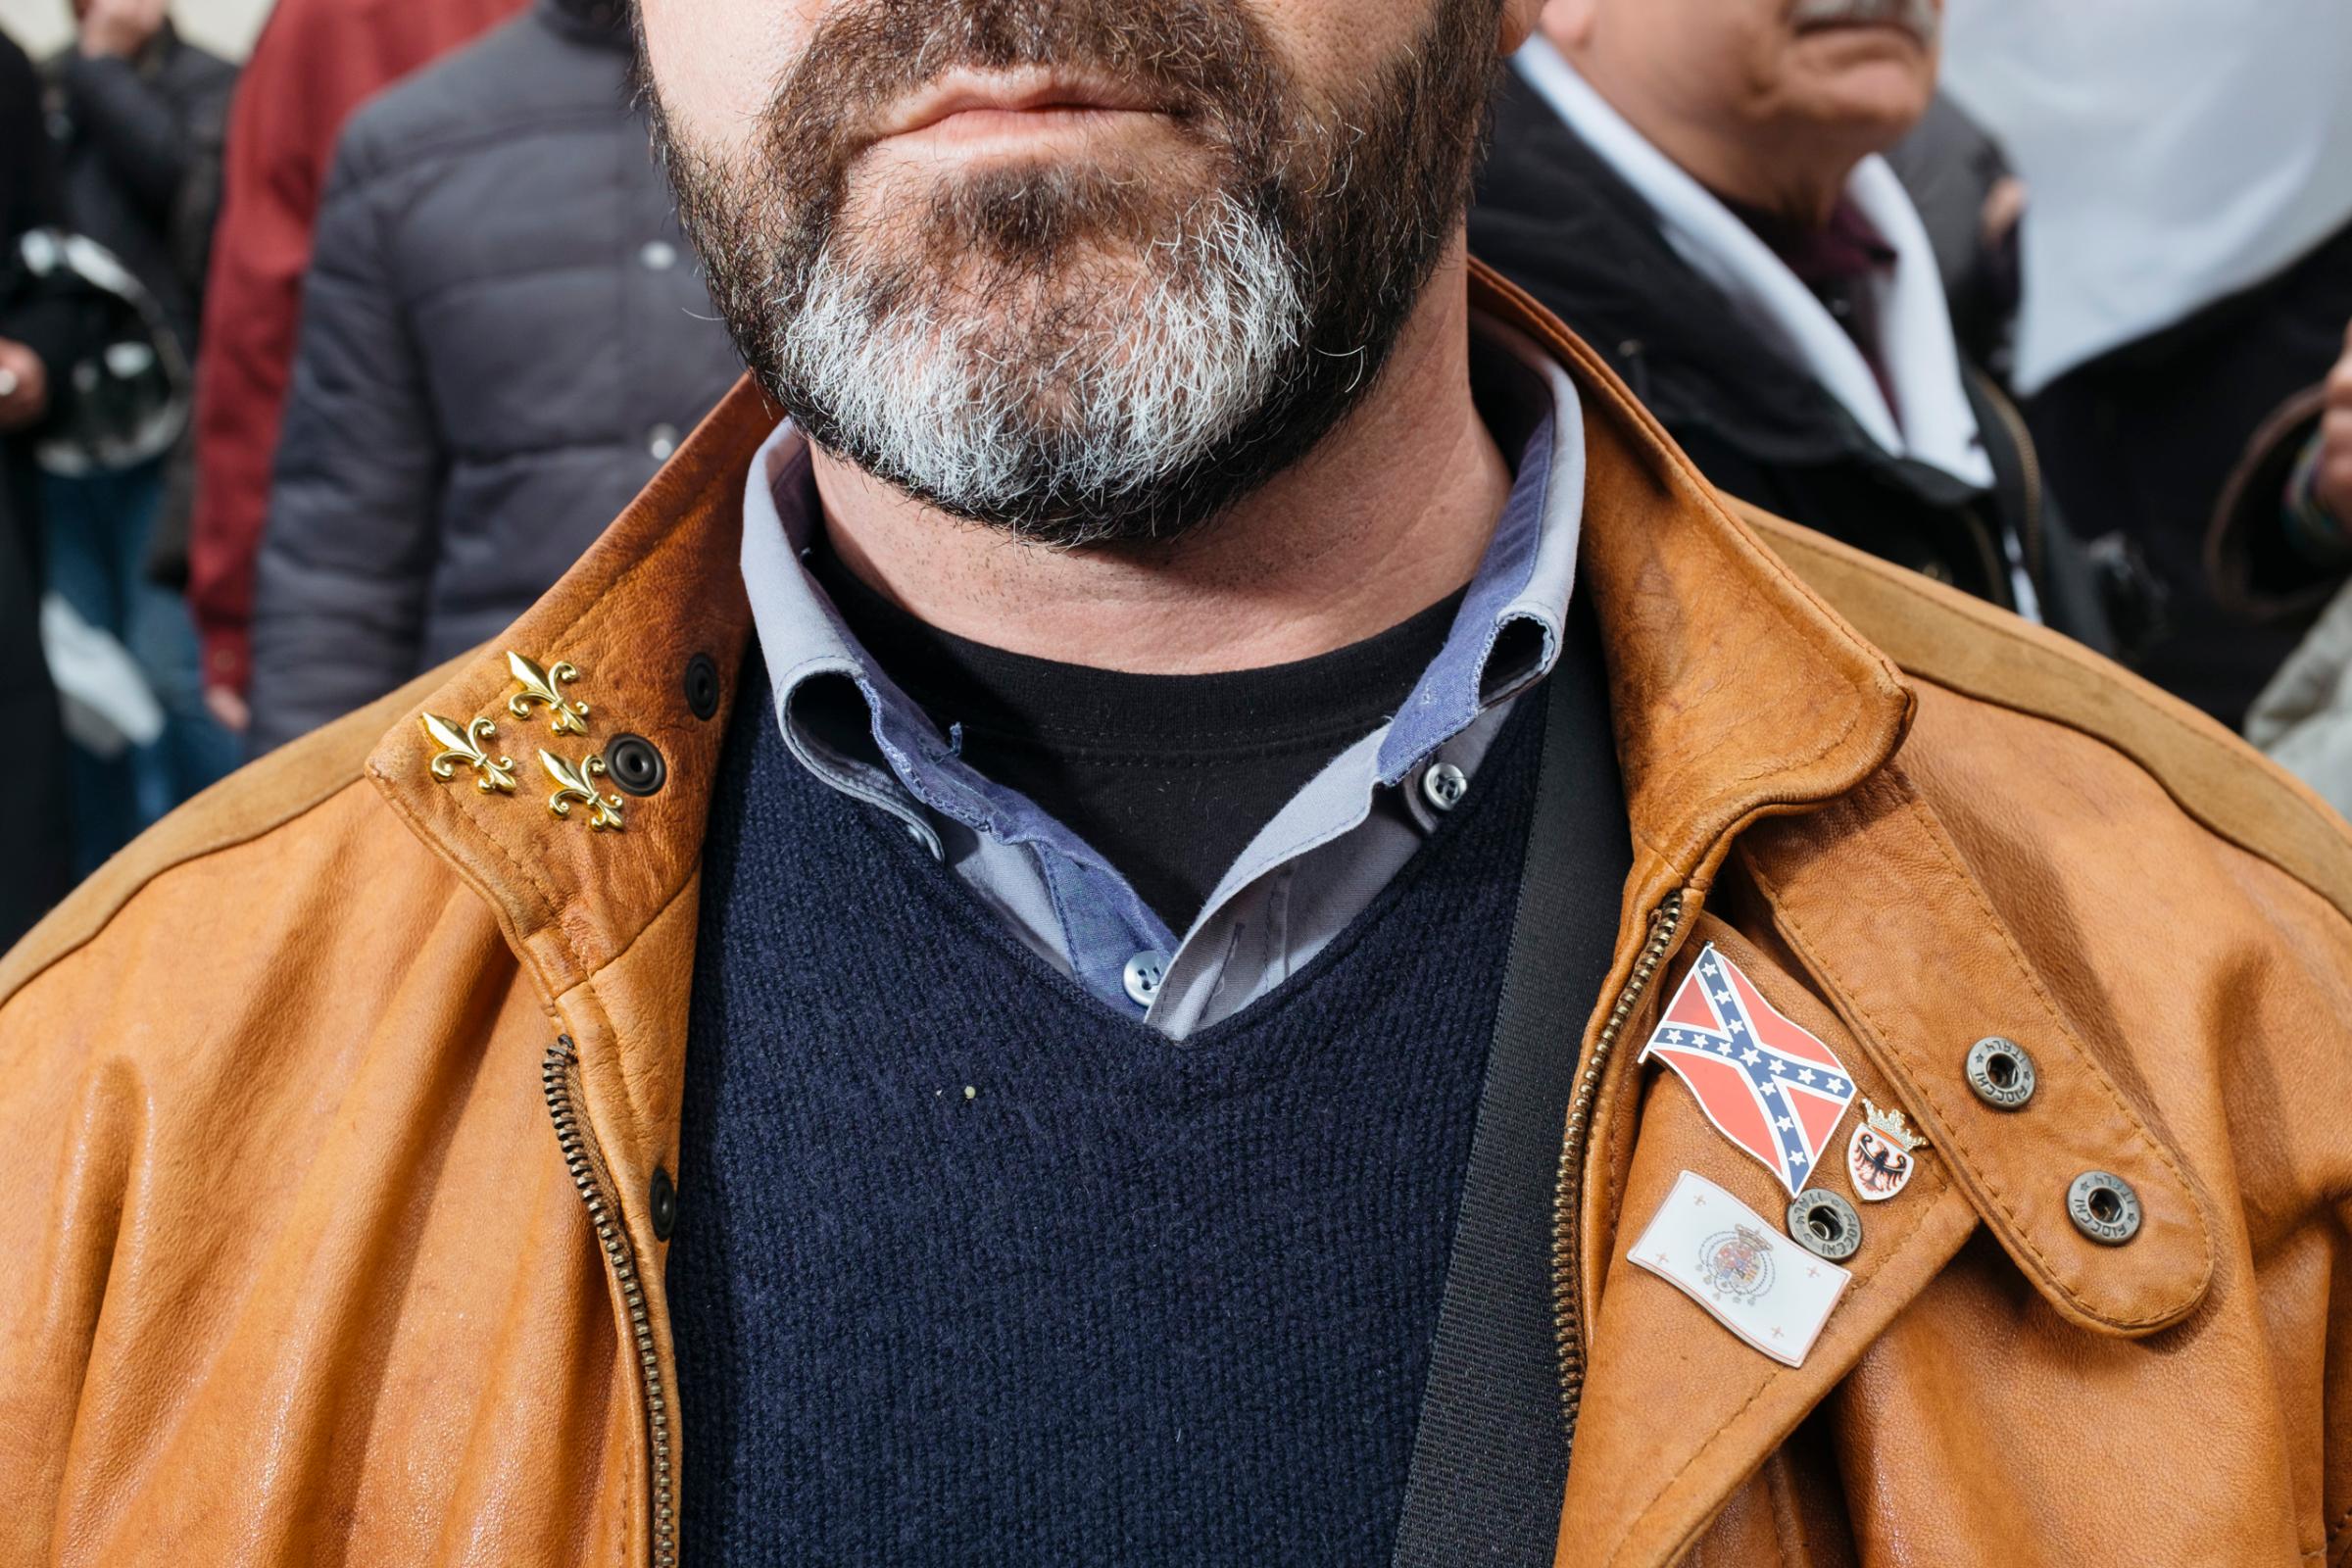 Details of a jacket wore by Aniello Sicignano, 47, a mail carrier contractor and proclaimed head of the modern brigands. He is nicknamed "The General", March, 2016.